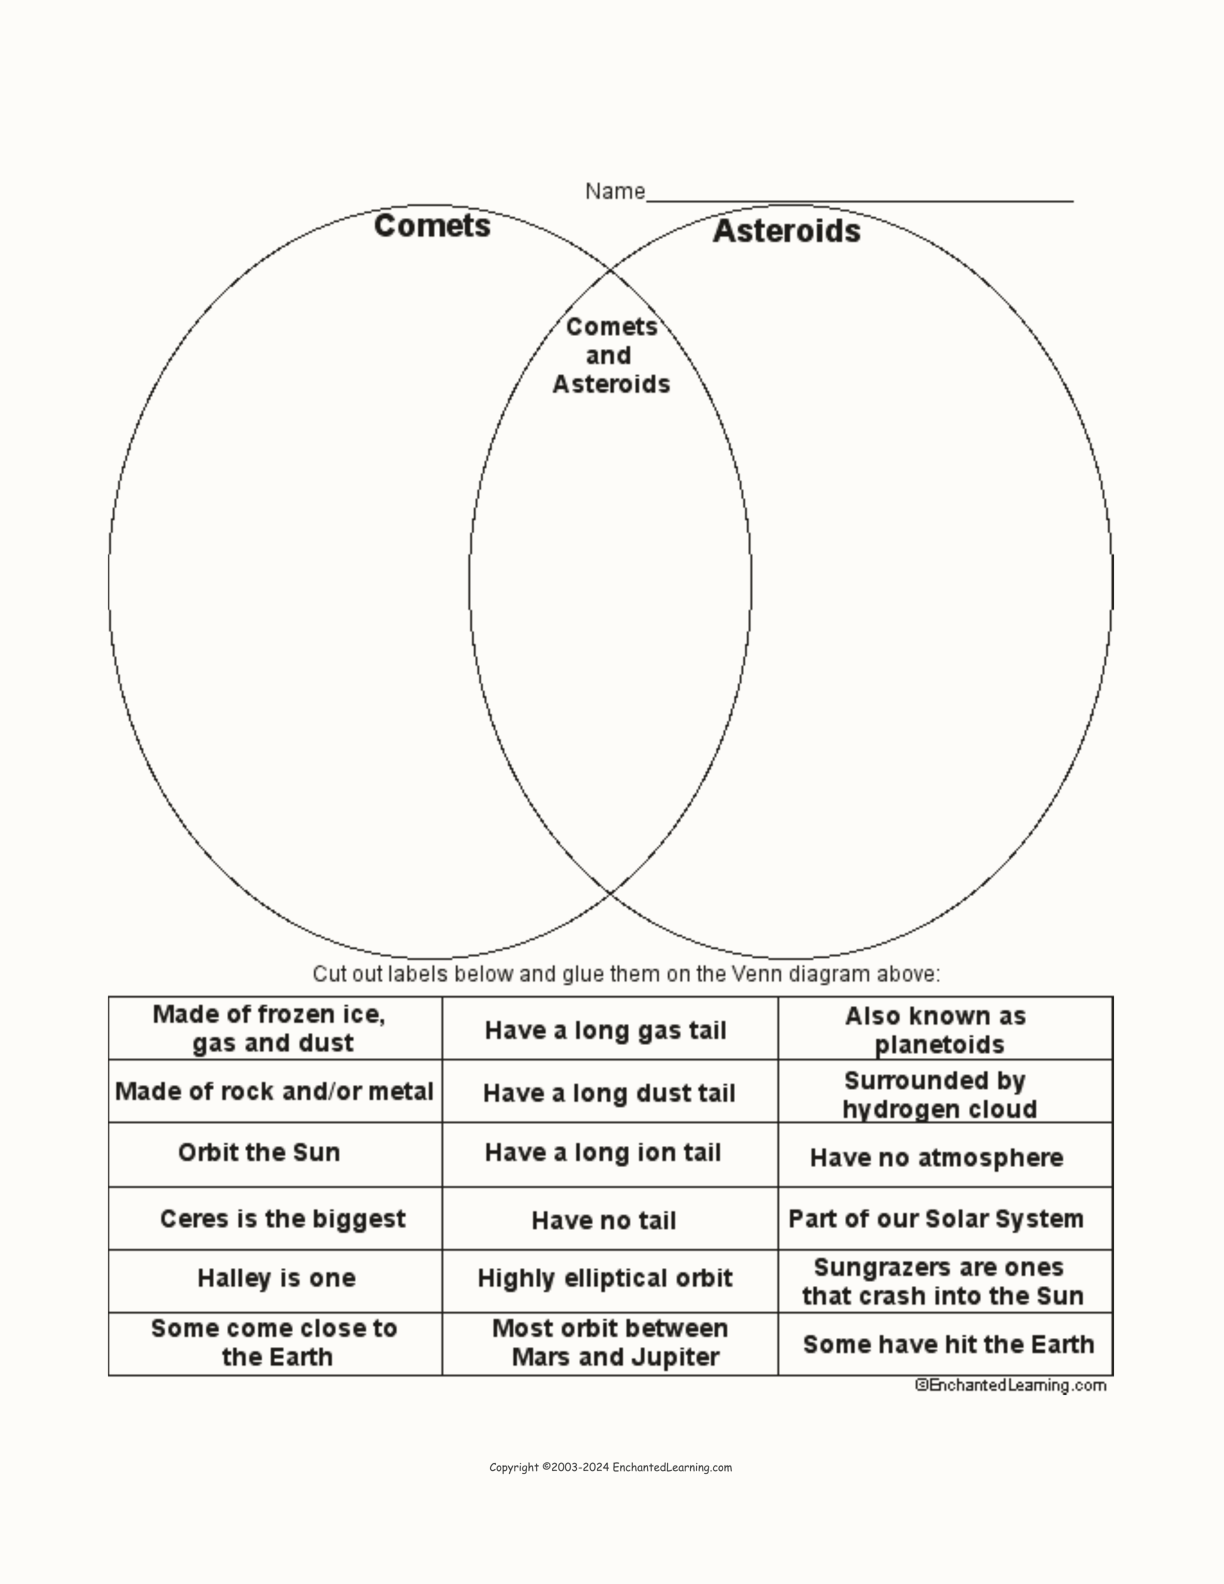 Comets and Asteroids Venn Diagram interactive worksheet page 1